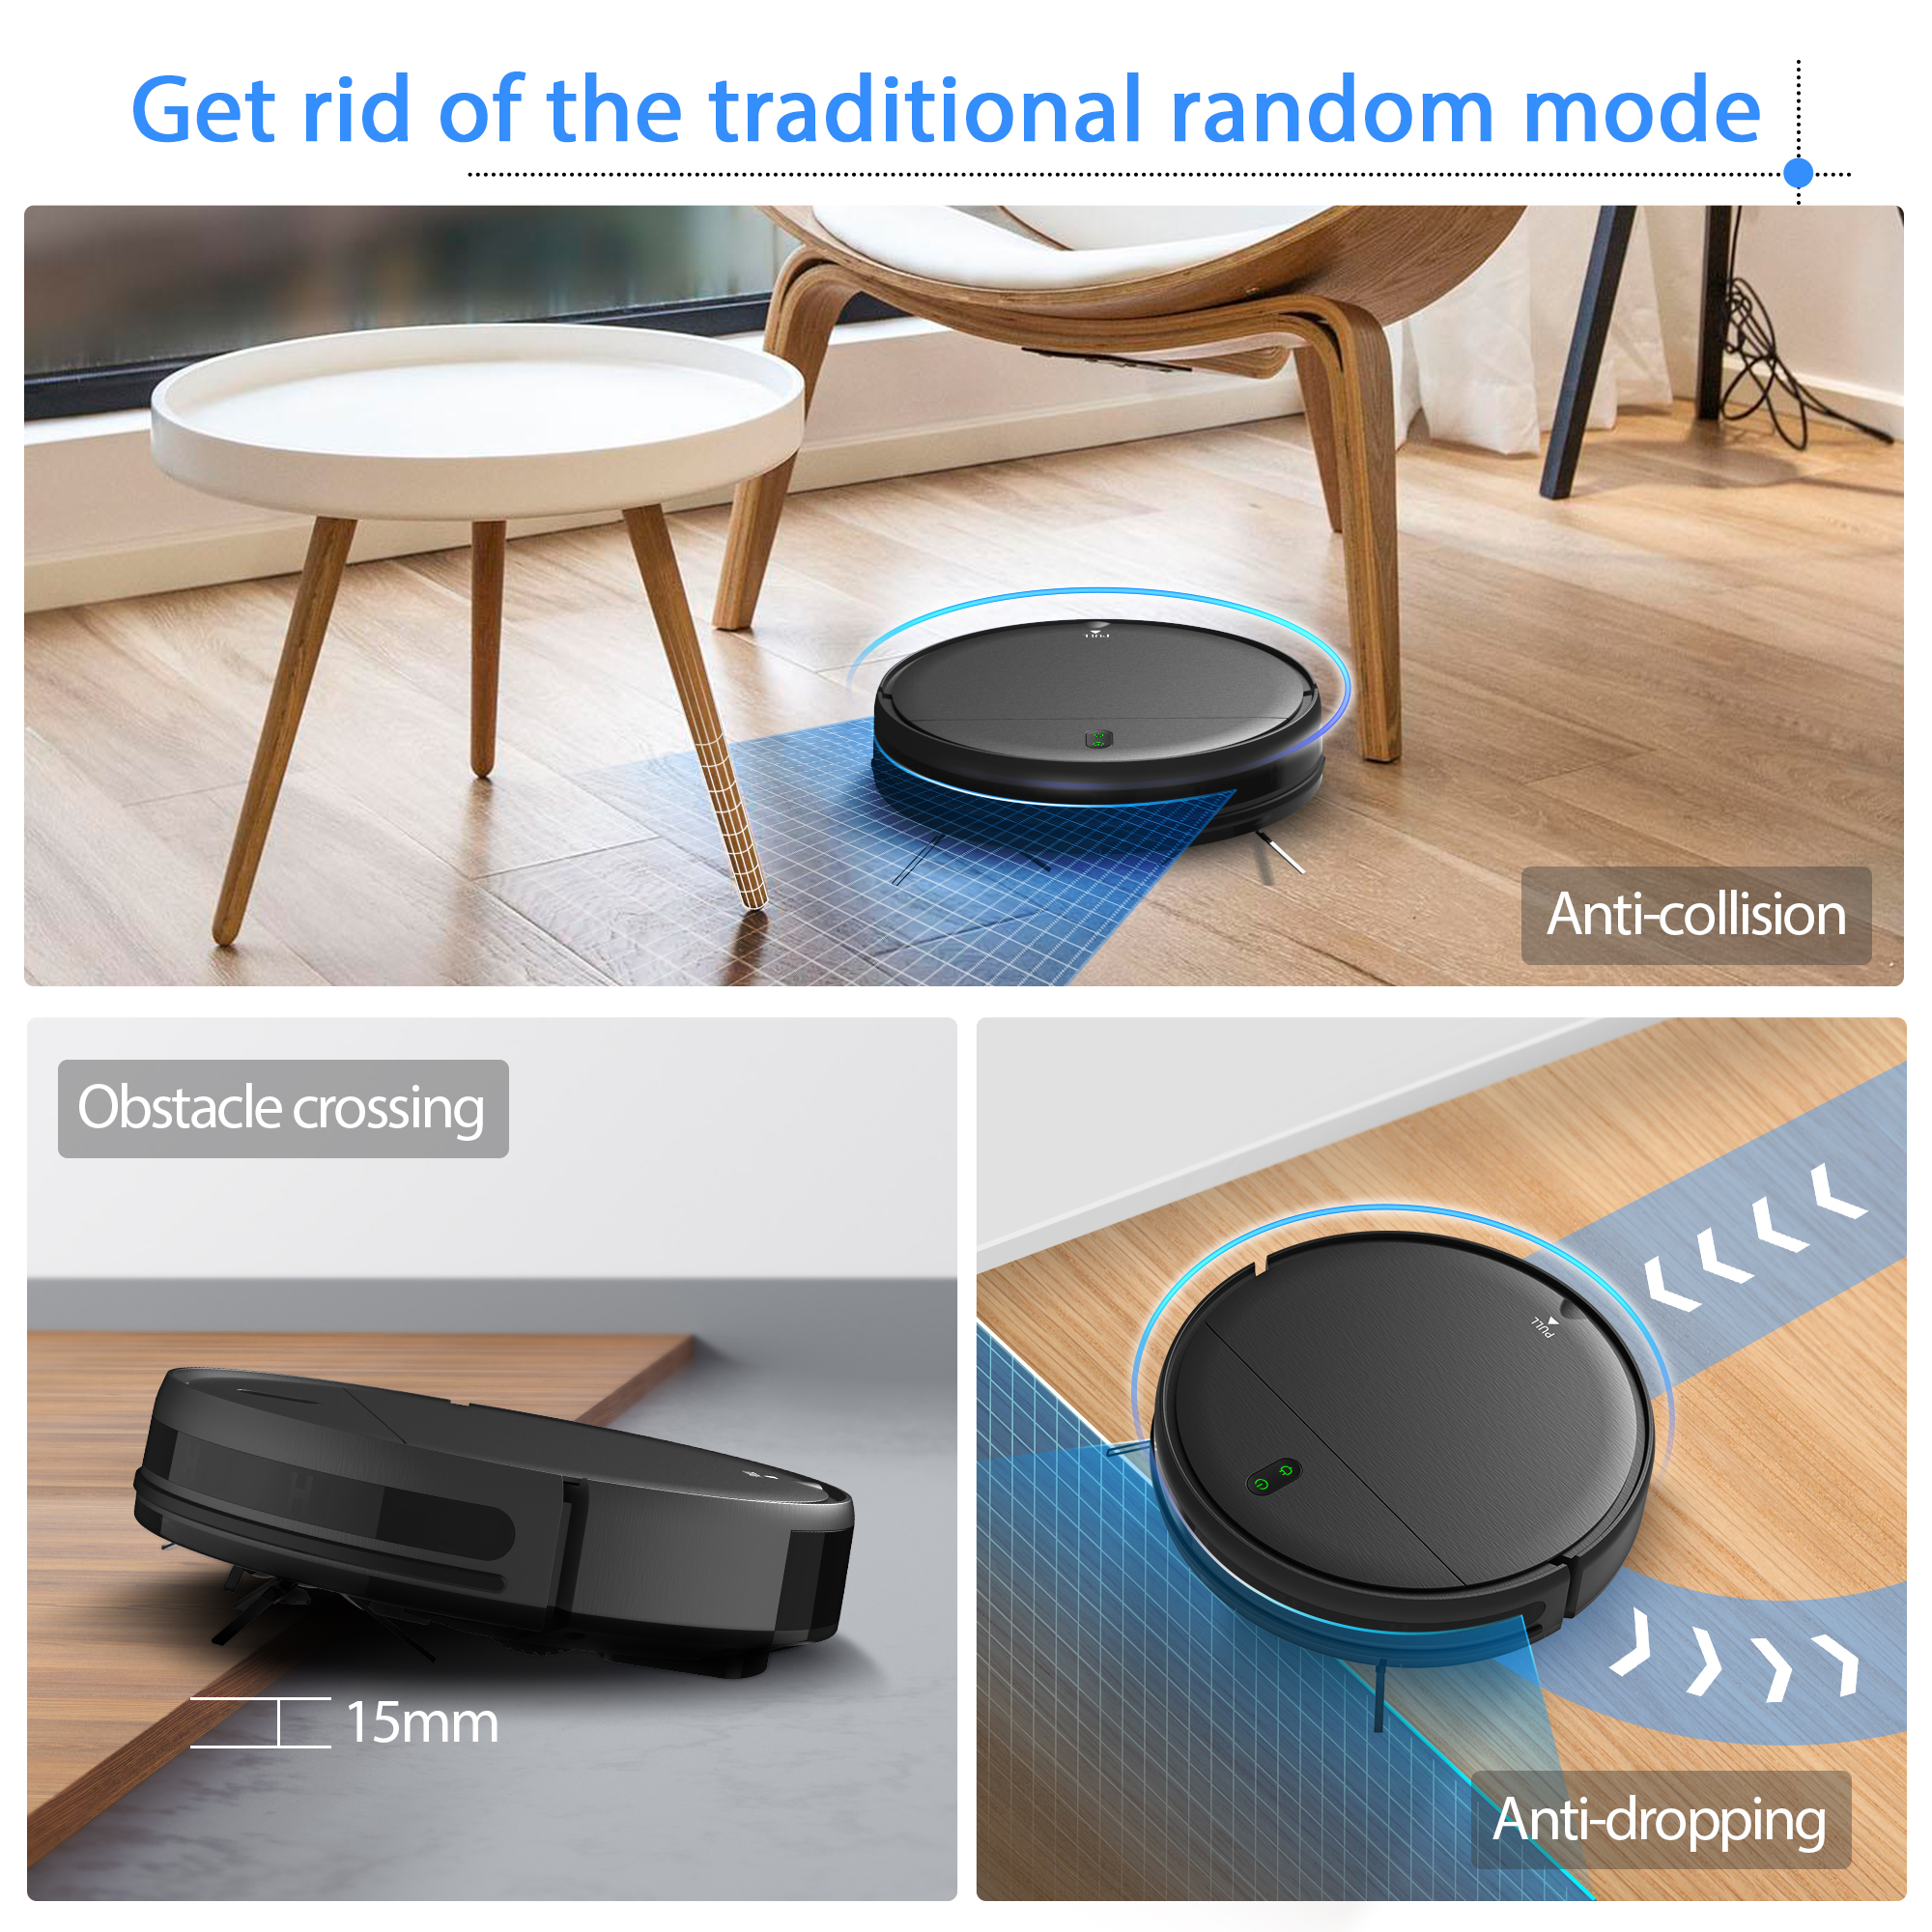 ONSON Robot Vacuum Cleaner, 2 in 1 Robot Vacuum and Mop Combo, With WIFI Connection For Pet Hair, Hard Floor - image 5 of 9